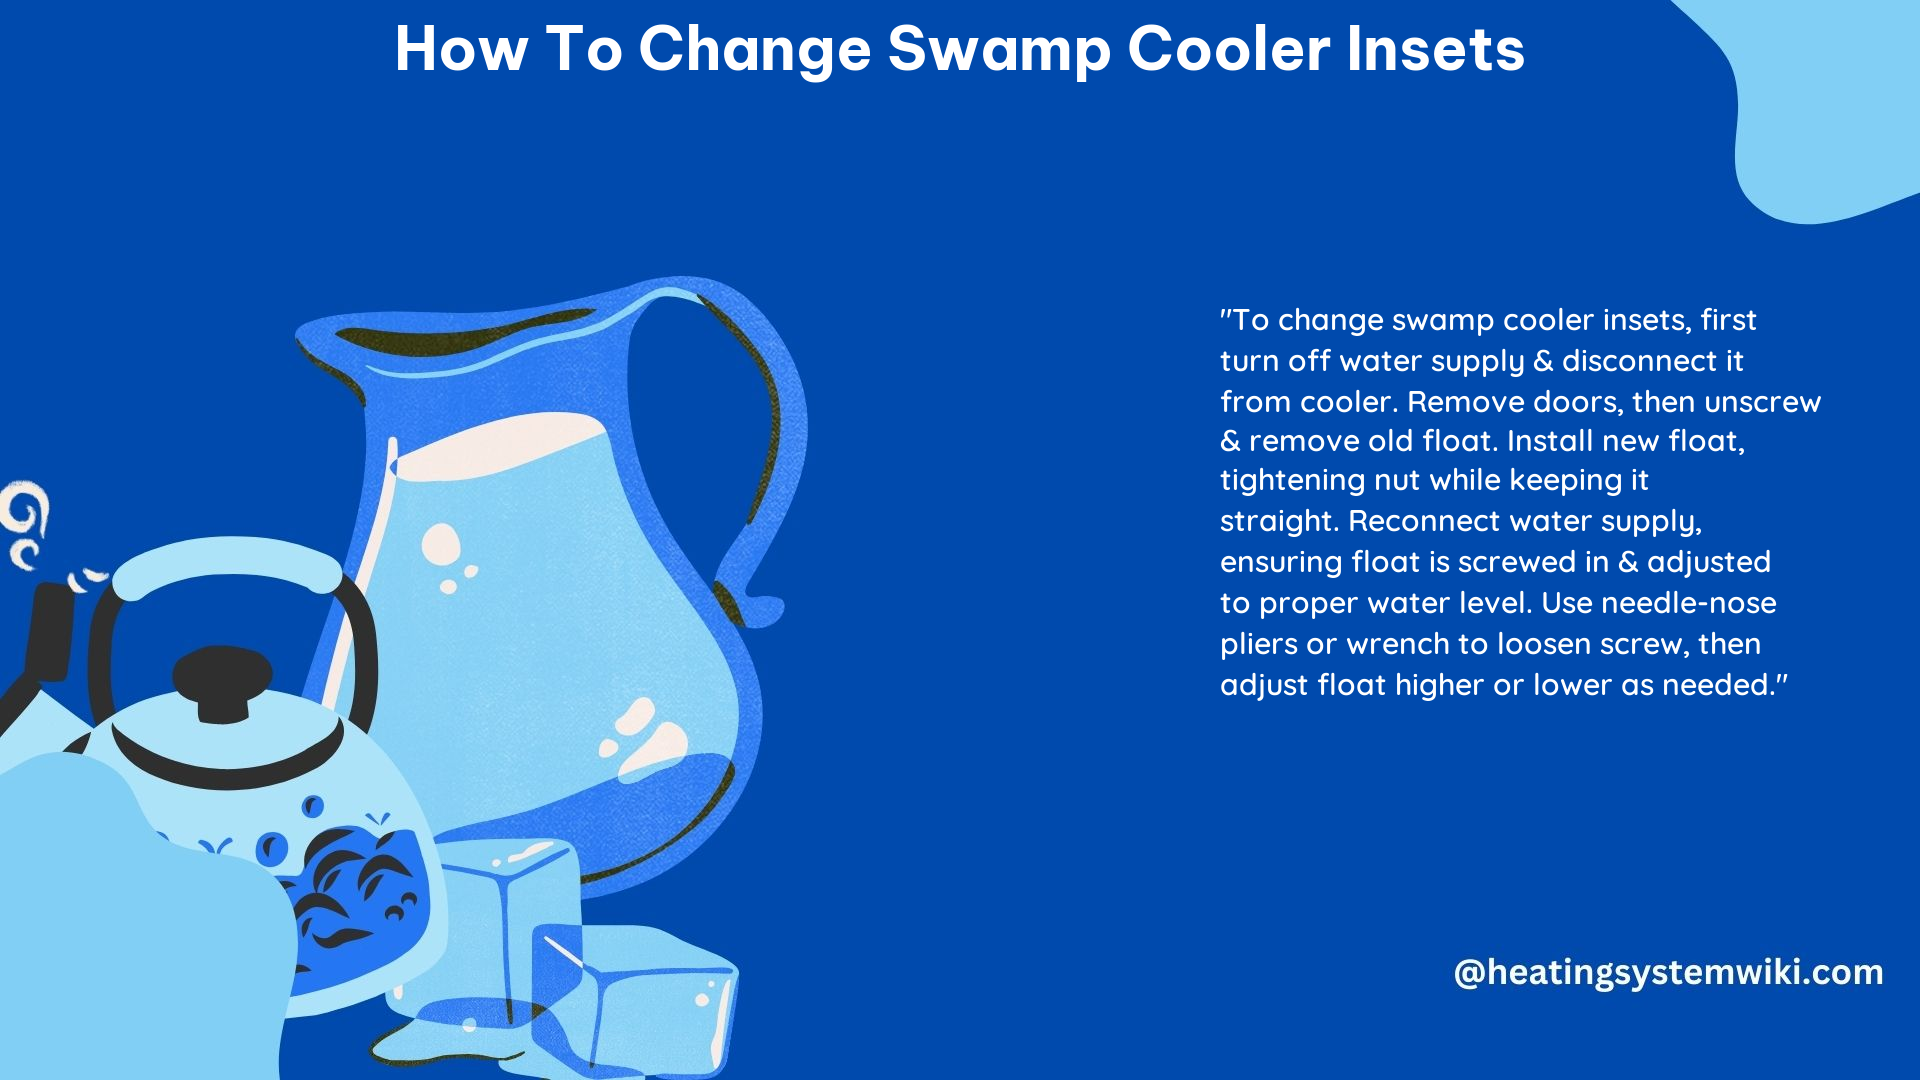 How to Change Swamp Cooler Insets